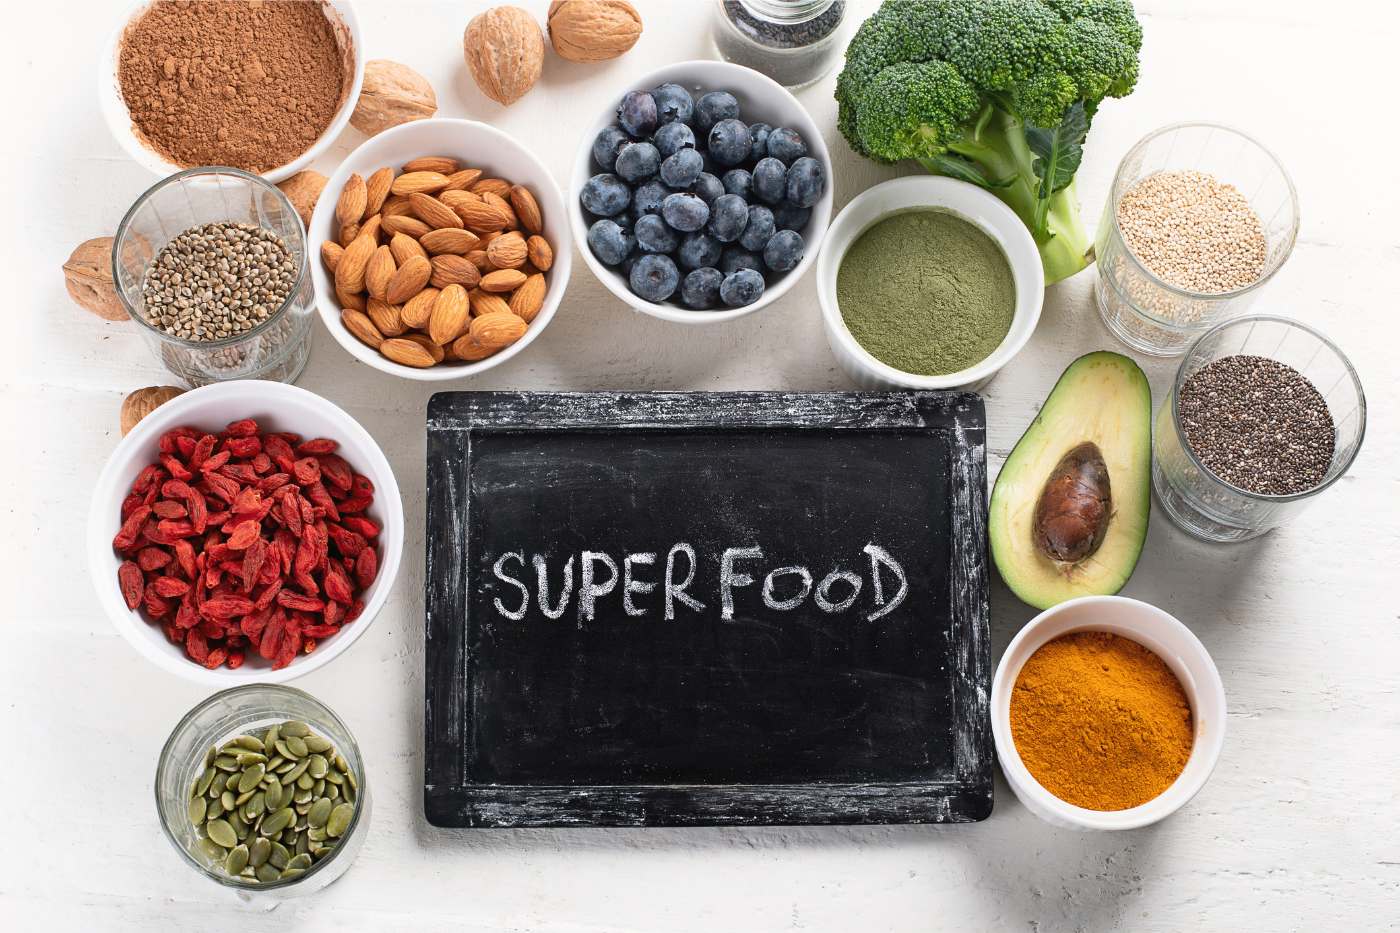 Incorporate Superfoods